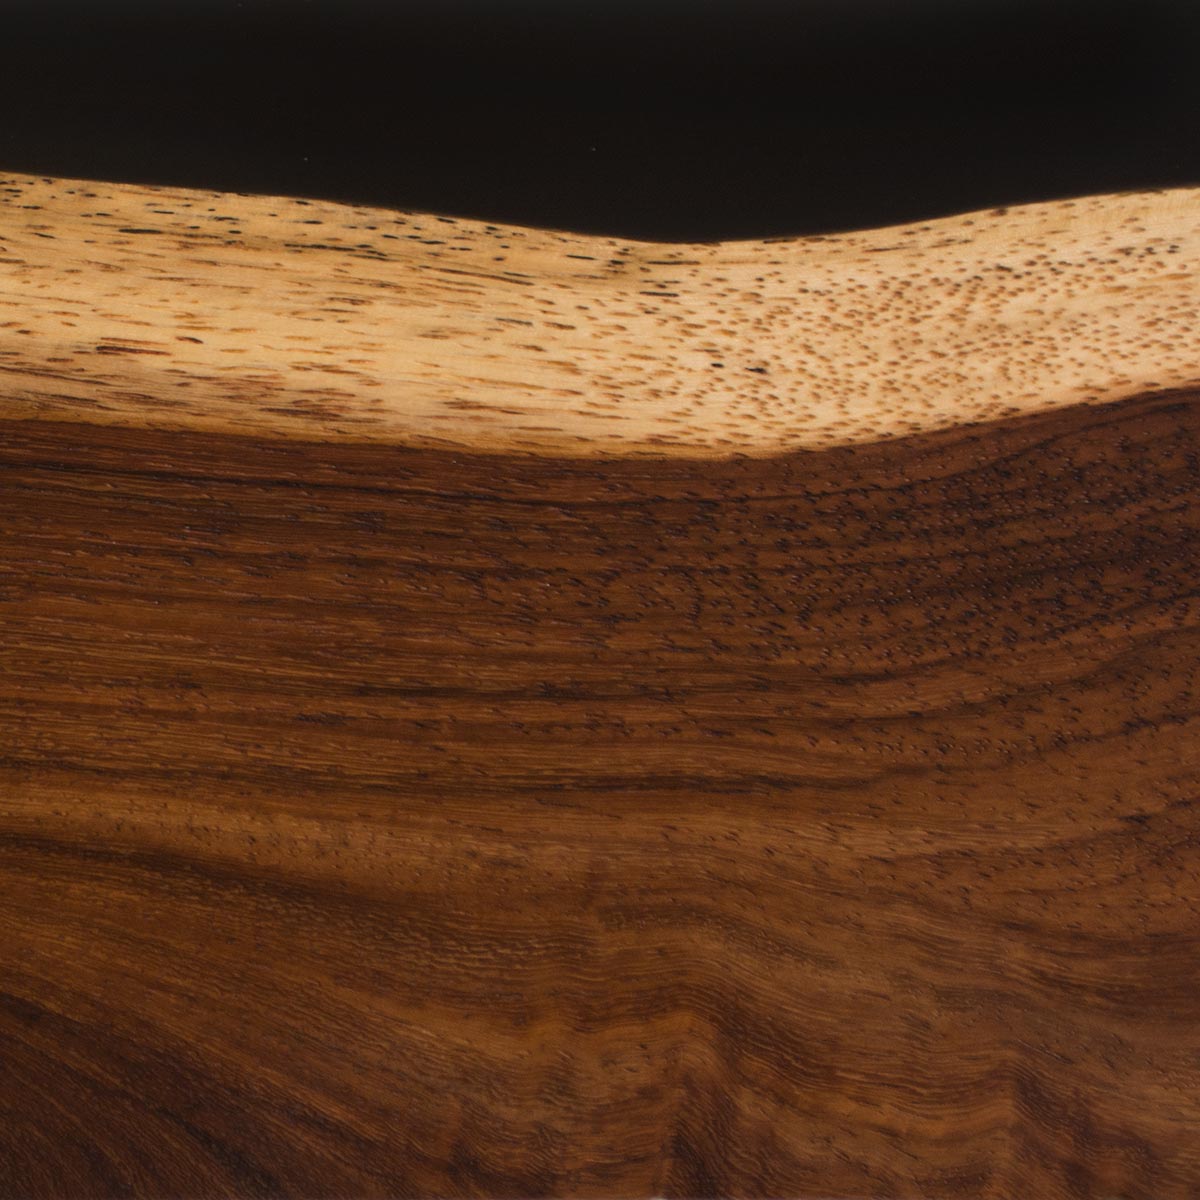 Black epoxy resin with live edge indian rosewood, featuring a contrasting band of light sapwood and dark brown heartwood